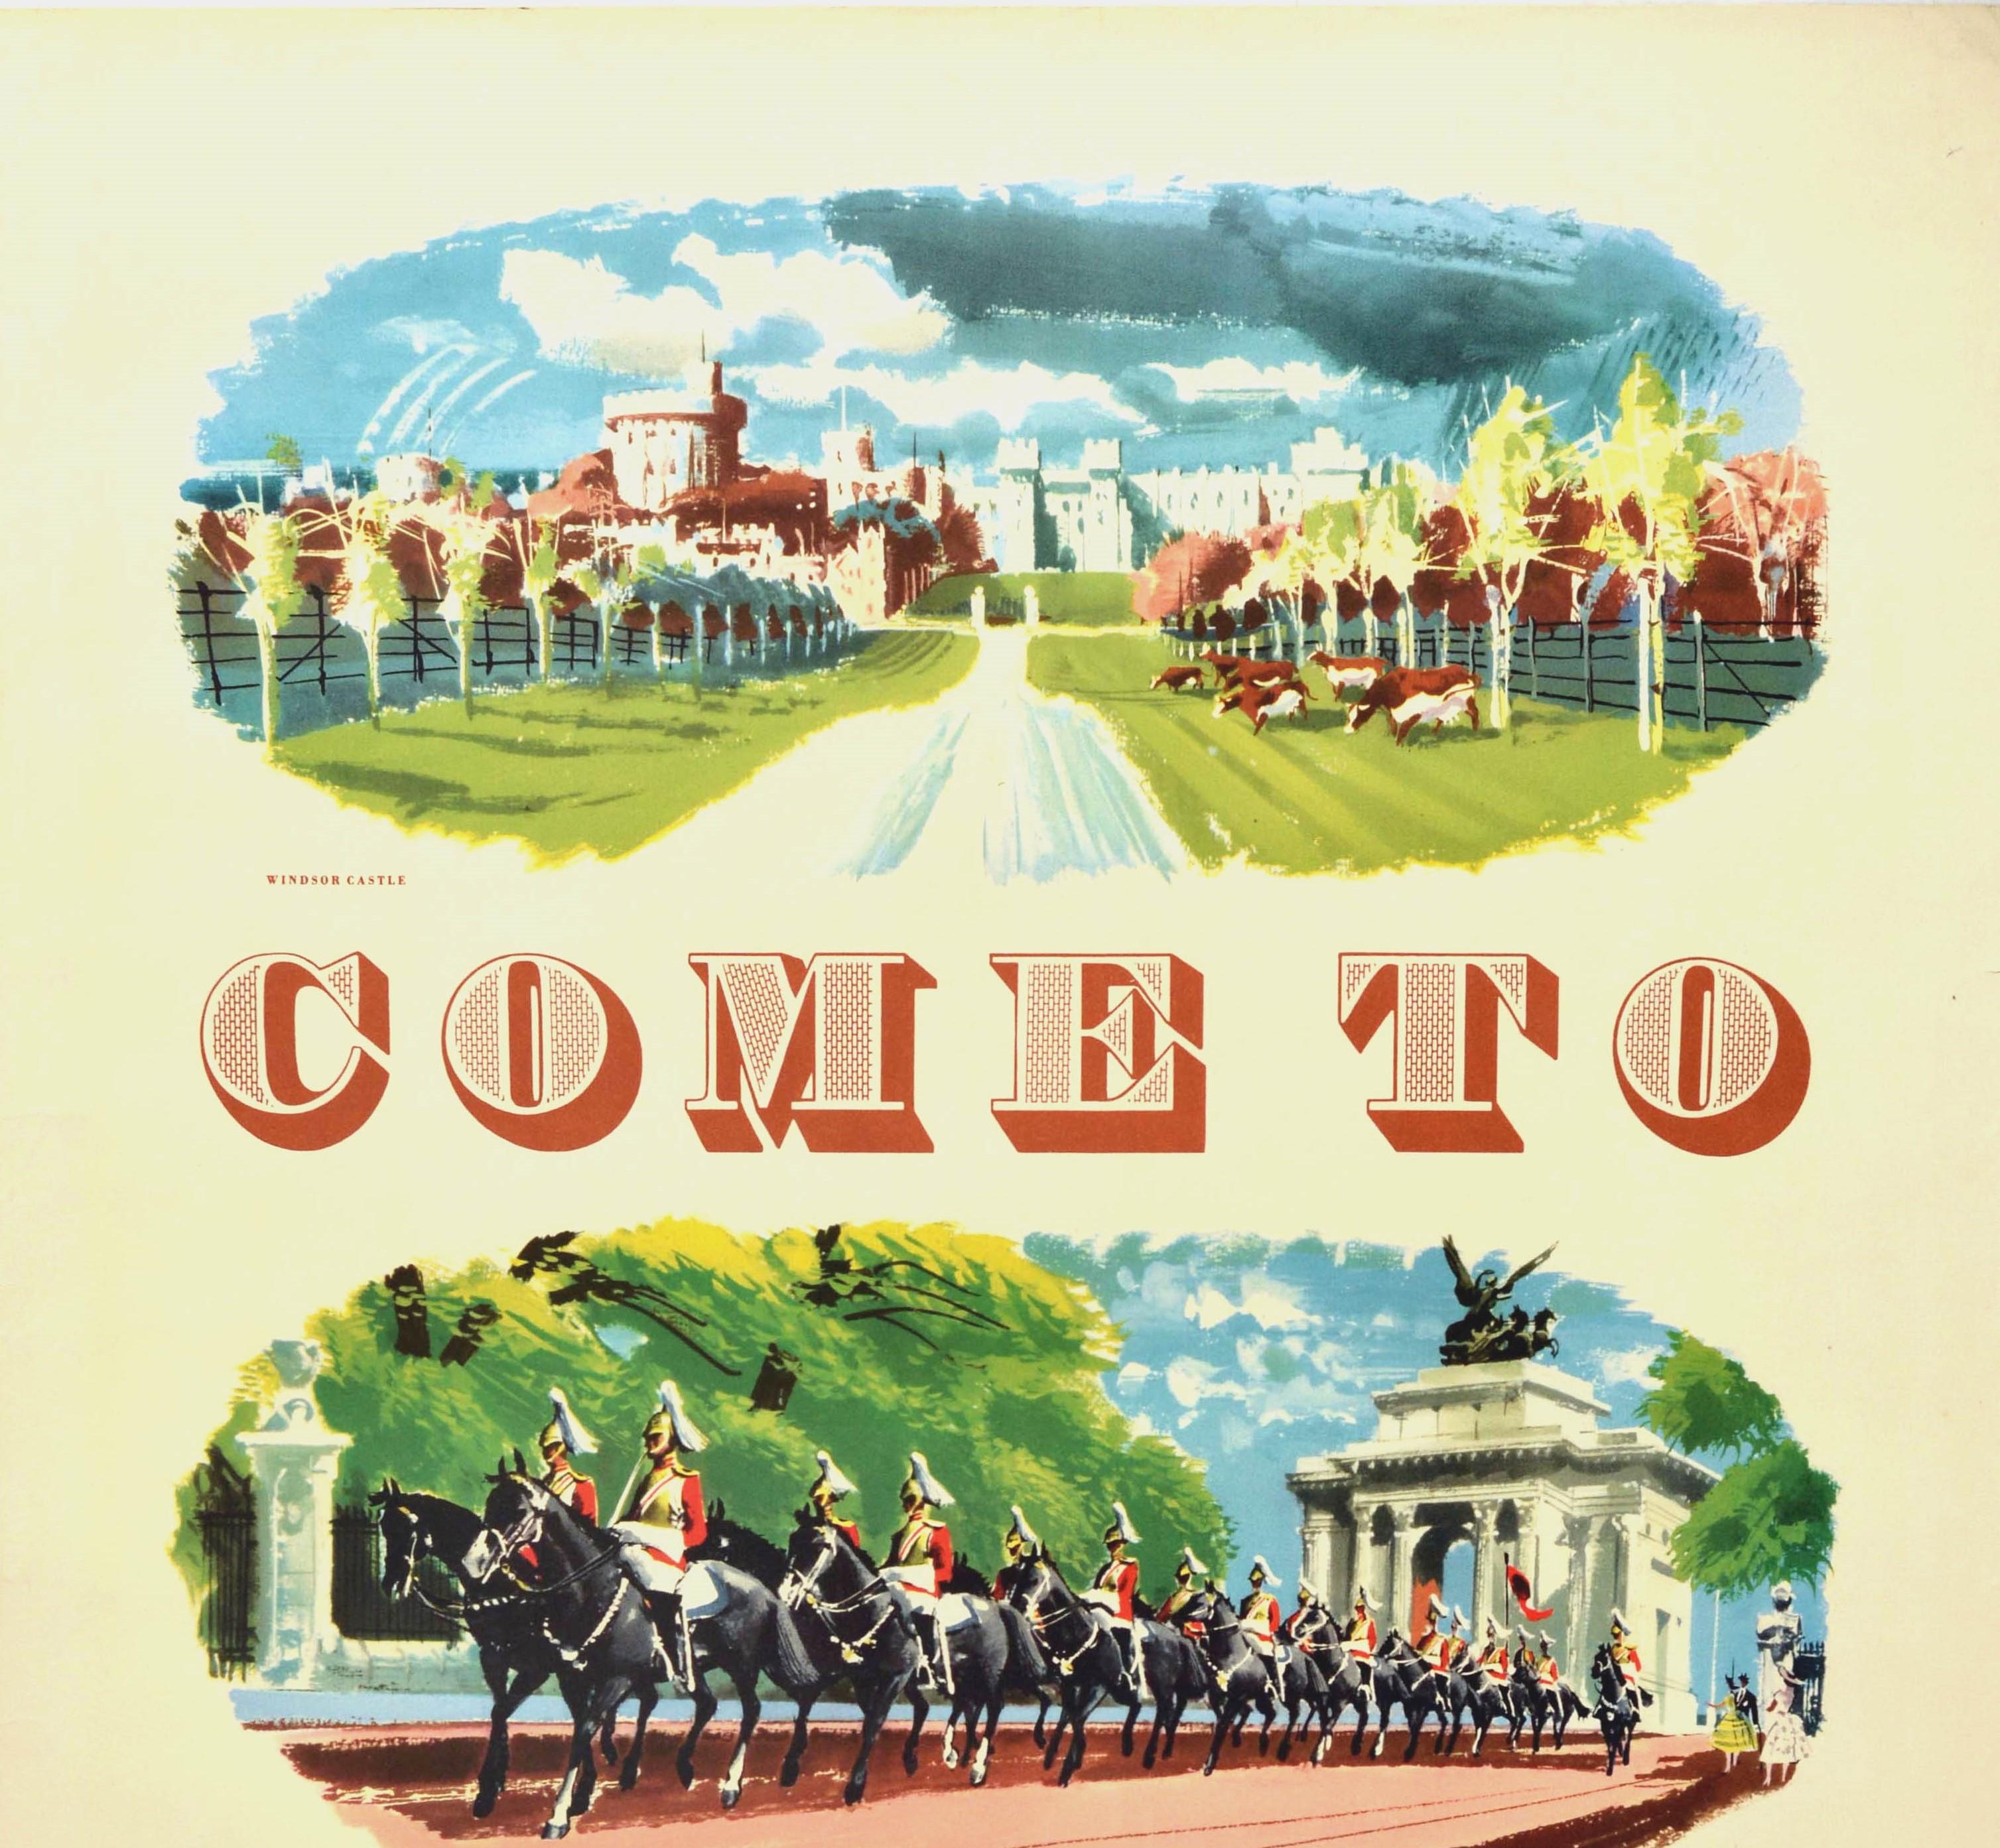 Original vintage travel advertising poster published by the British Travel and Holidays Association to promote the various traditional historic and other tourist attractions for visitors - Come to Britain - featuring the bold stylized title text